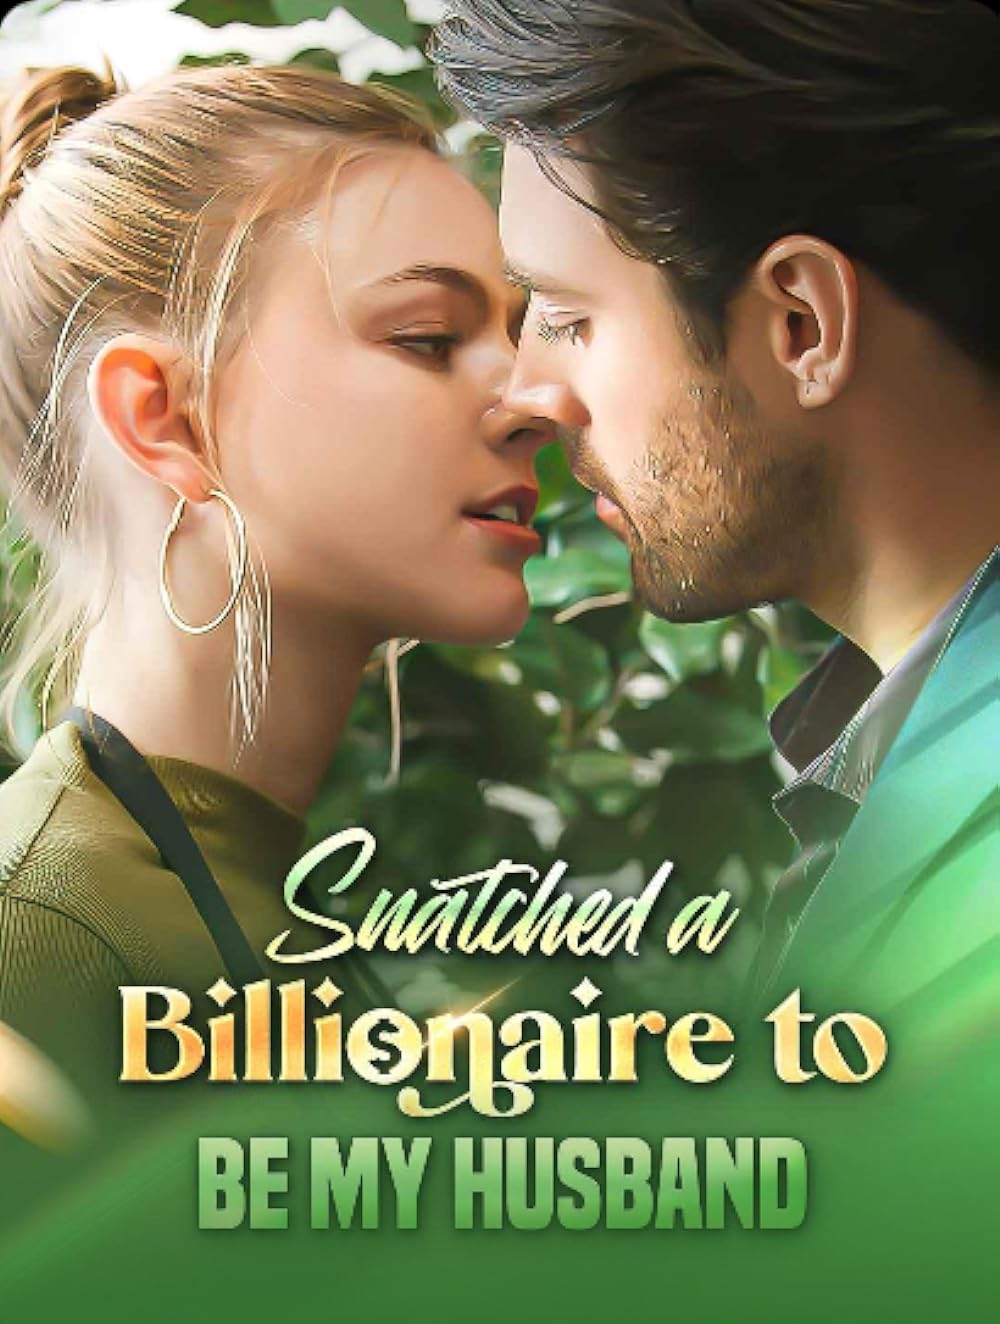 Snatched a Billionaire to be My Husband - Full Episodes for Free (Part 1)